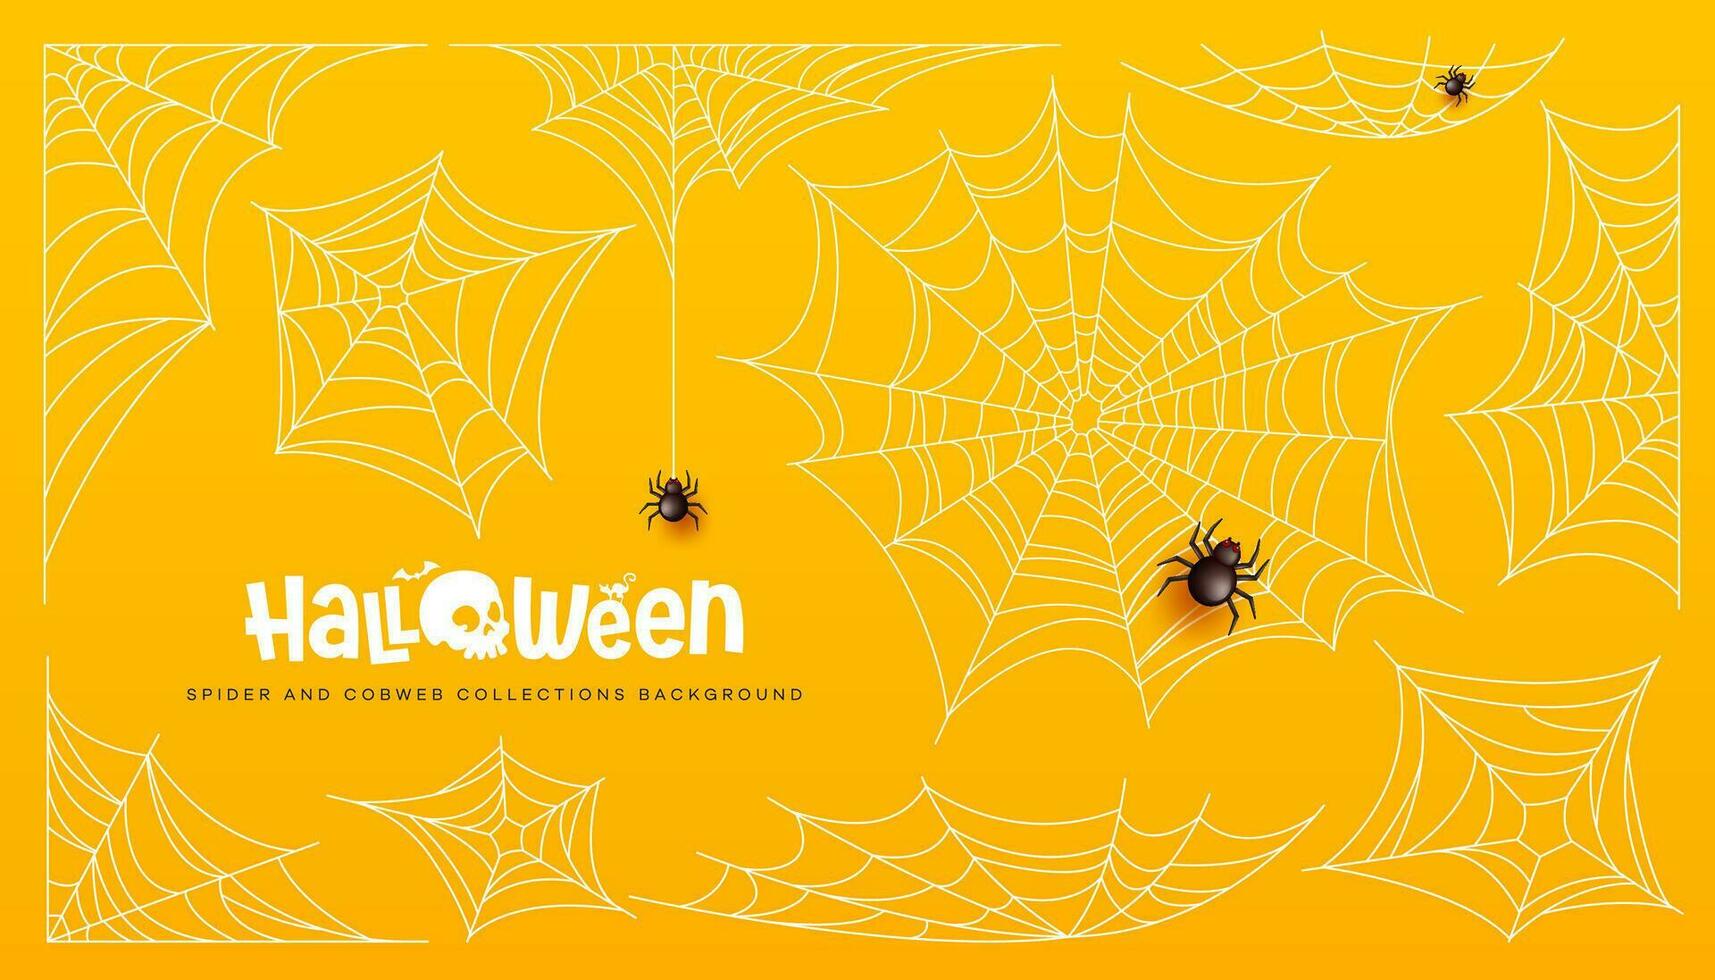 Halloween spider and cobweb collections on yellow background, Eps 10 vector illustration